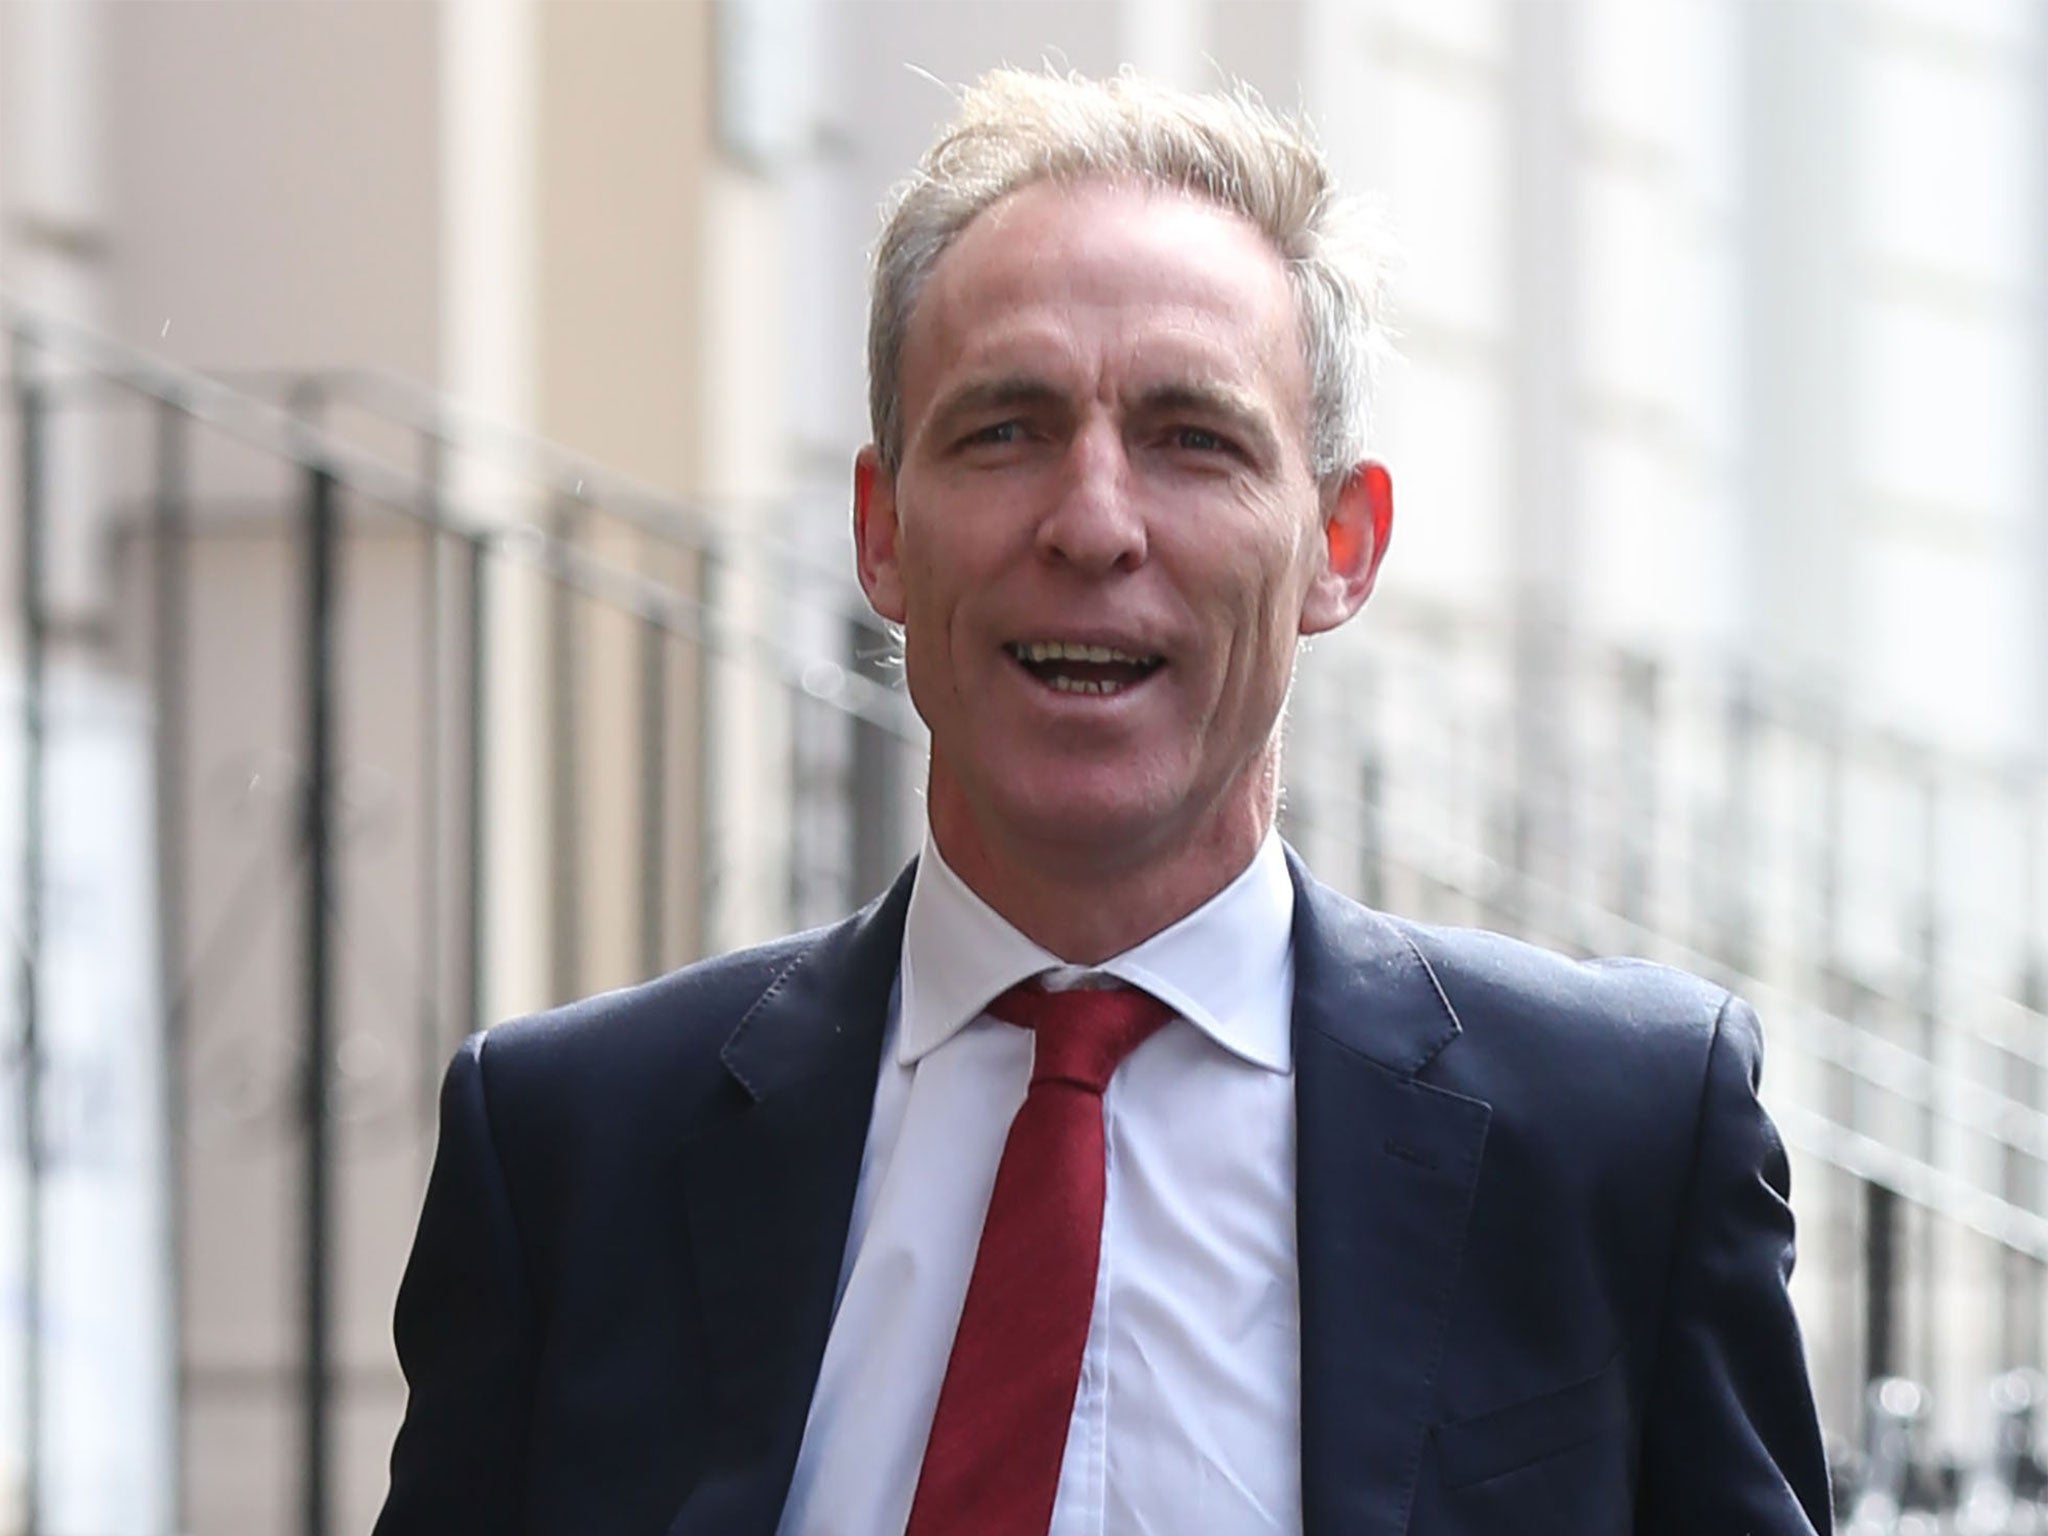 Jim Murphy had faced calls to resign following the general election